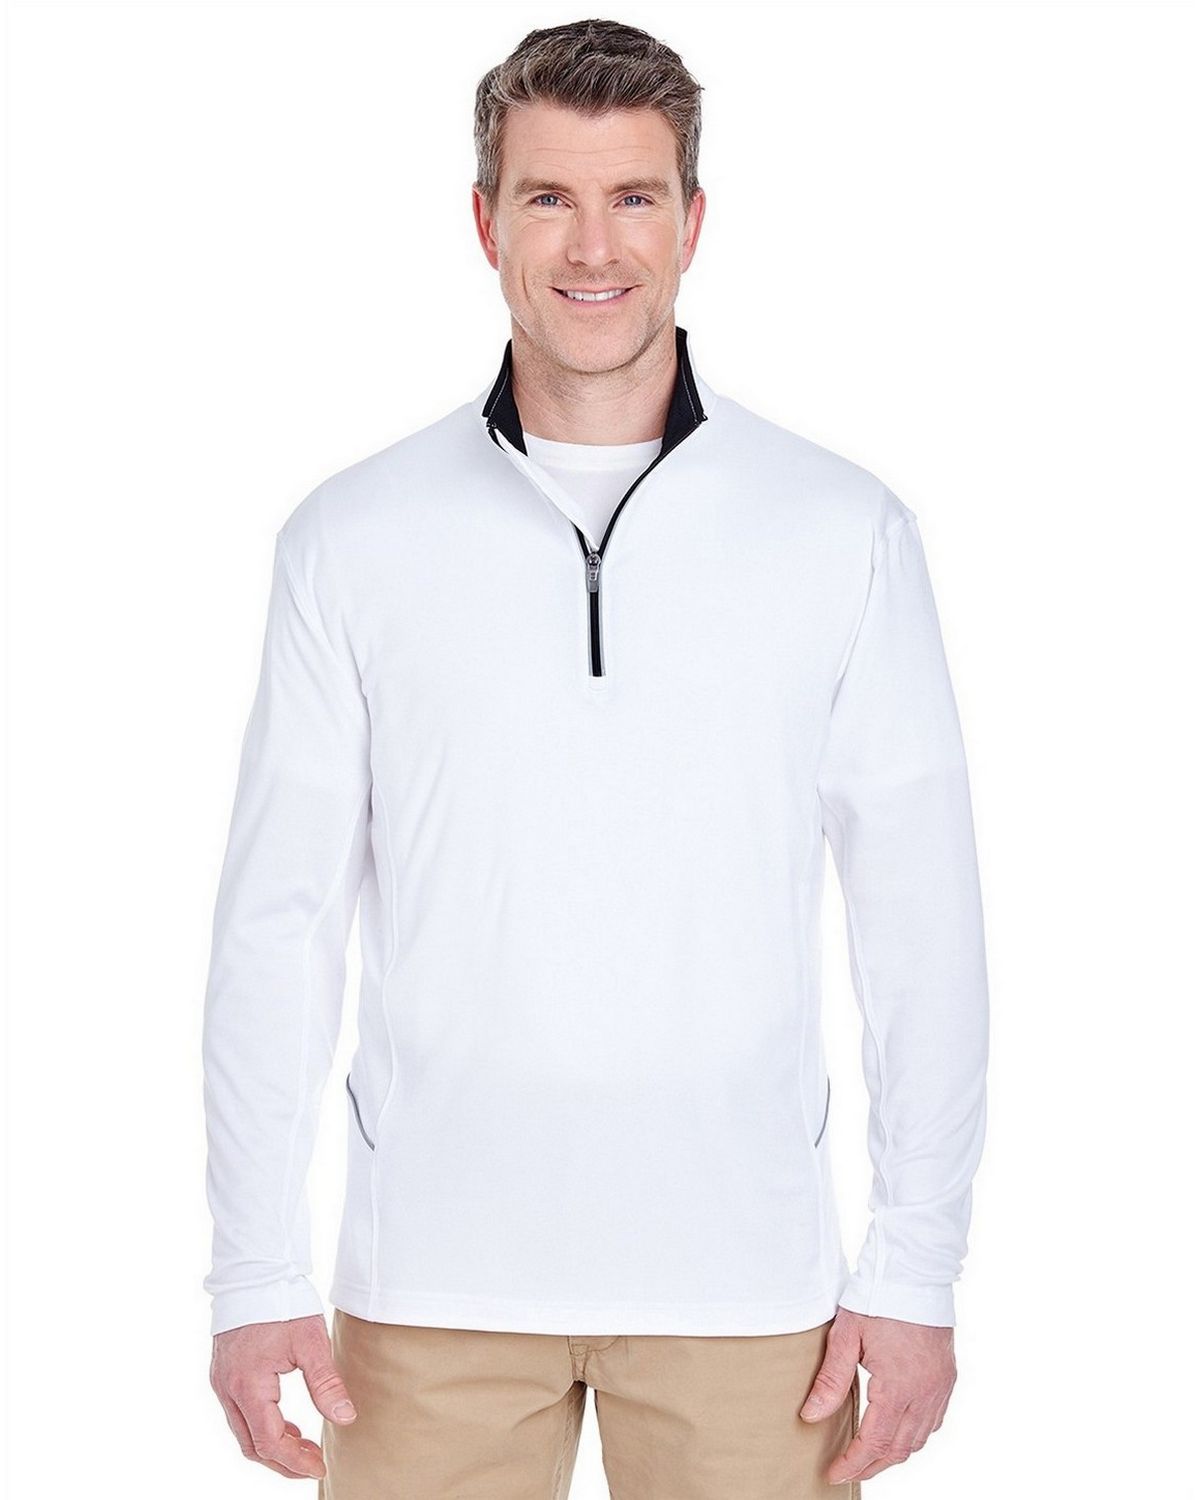 White/Silver 3XL UltraClub Mens Cool & Dry Sport Color Block 1/4 Zip Pullover 